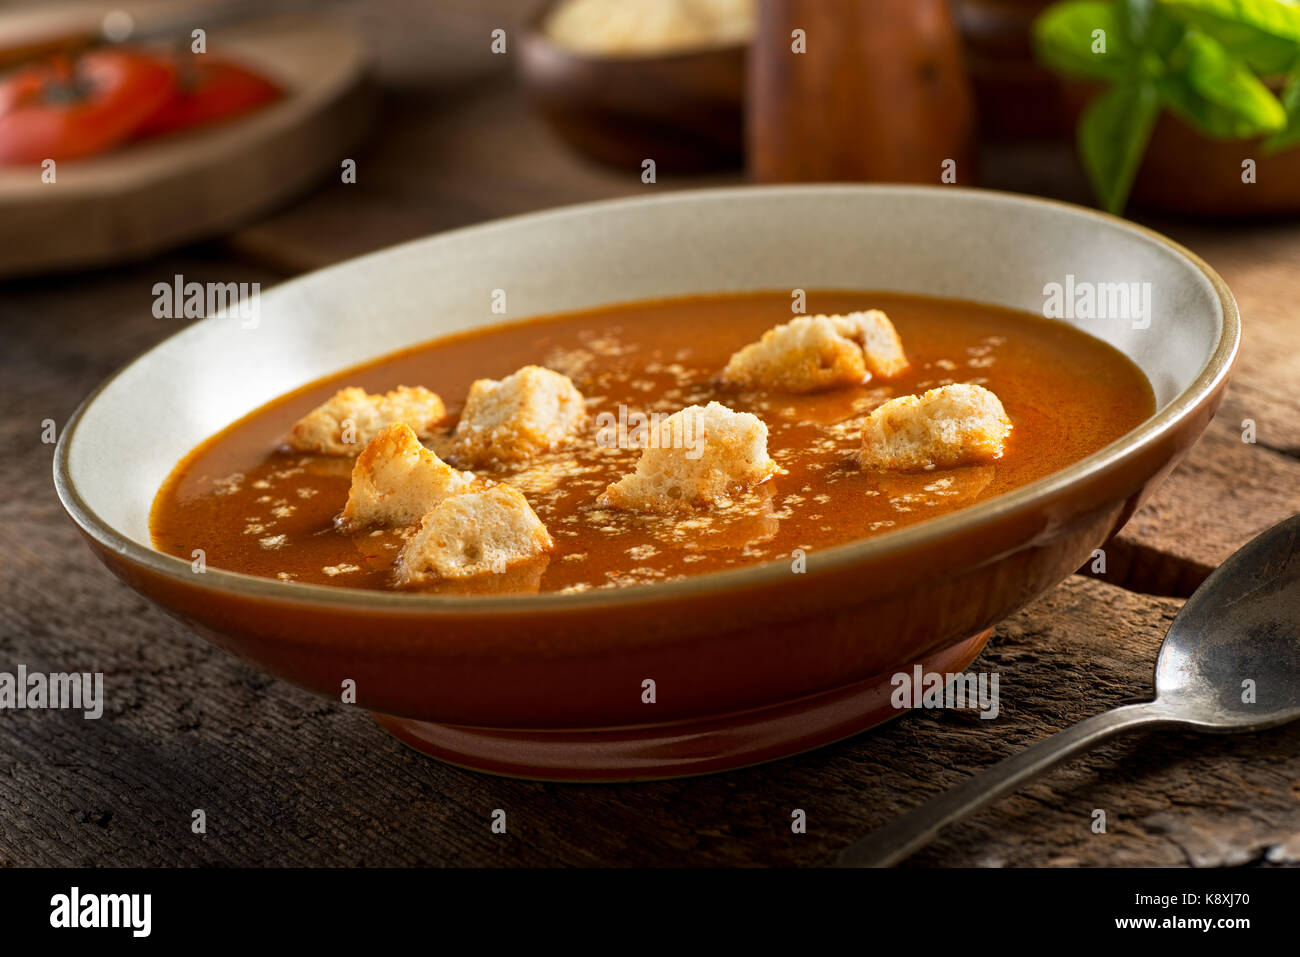 A delicious bowl of homemade rustic tomato soup with croutons and parmesan cheese. Stock Photo